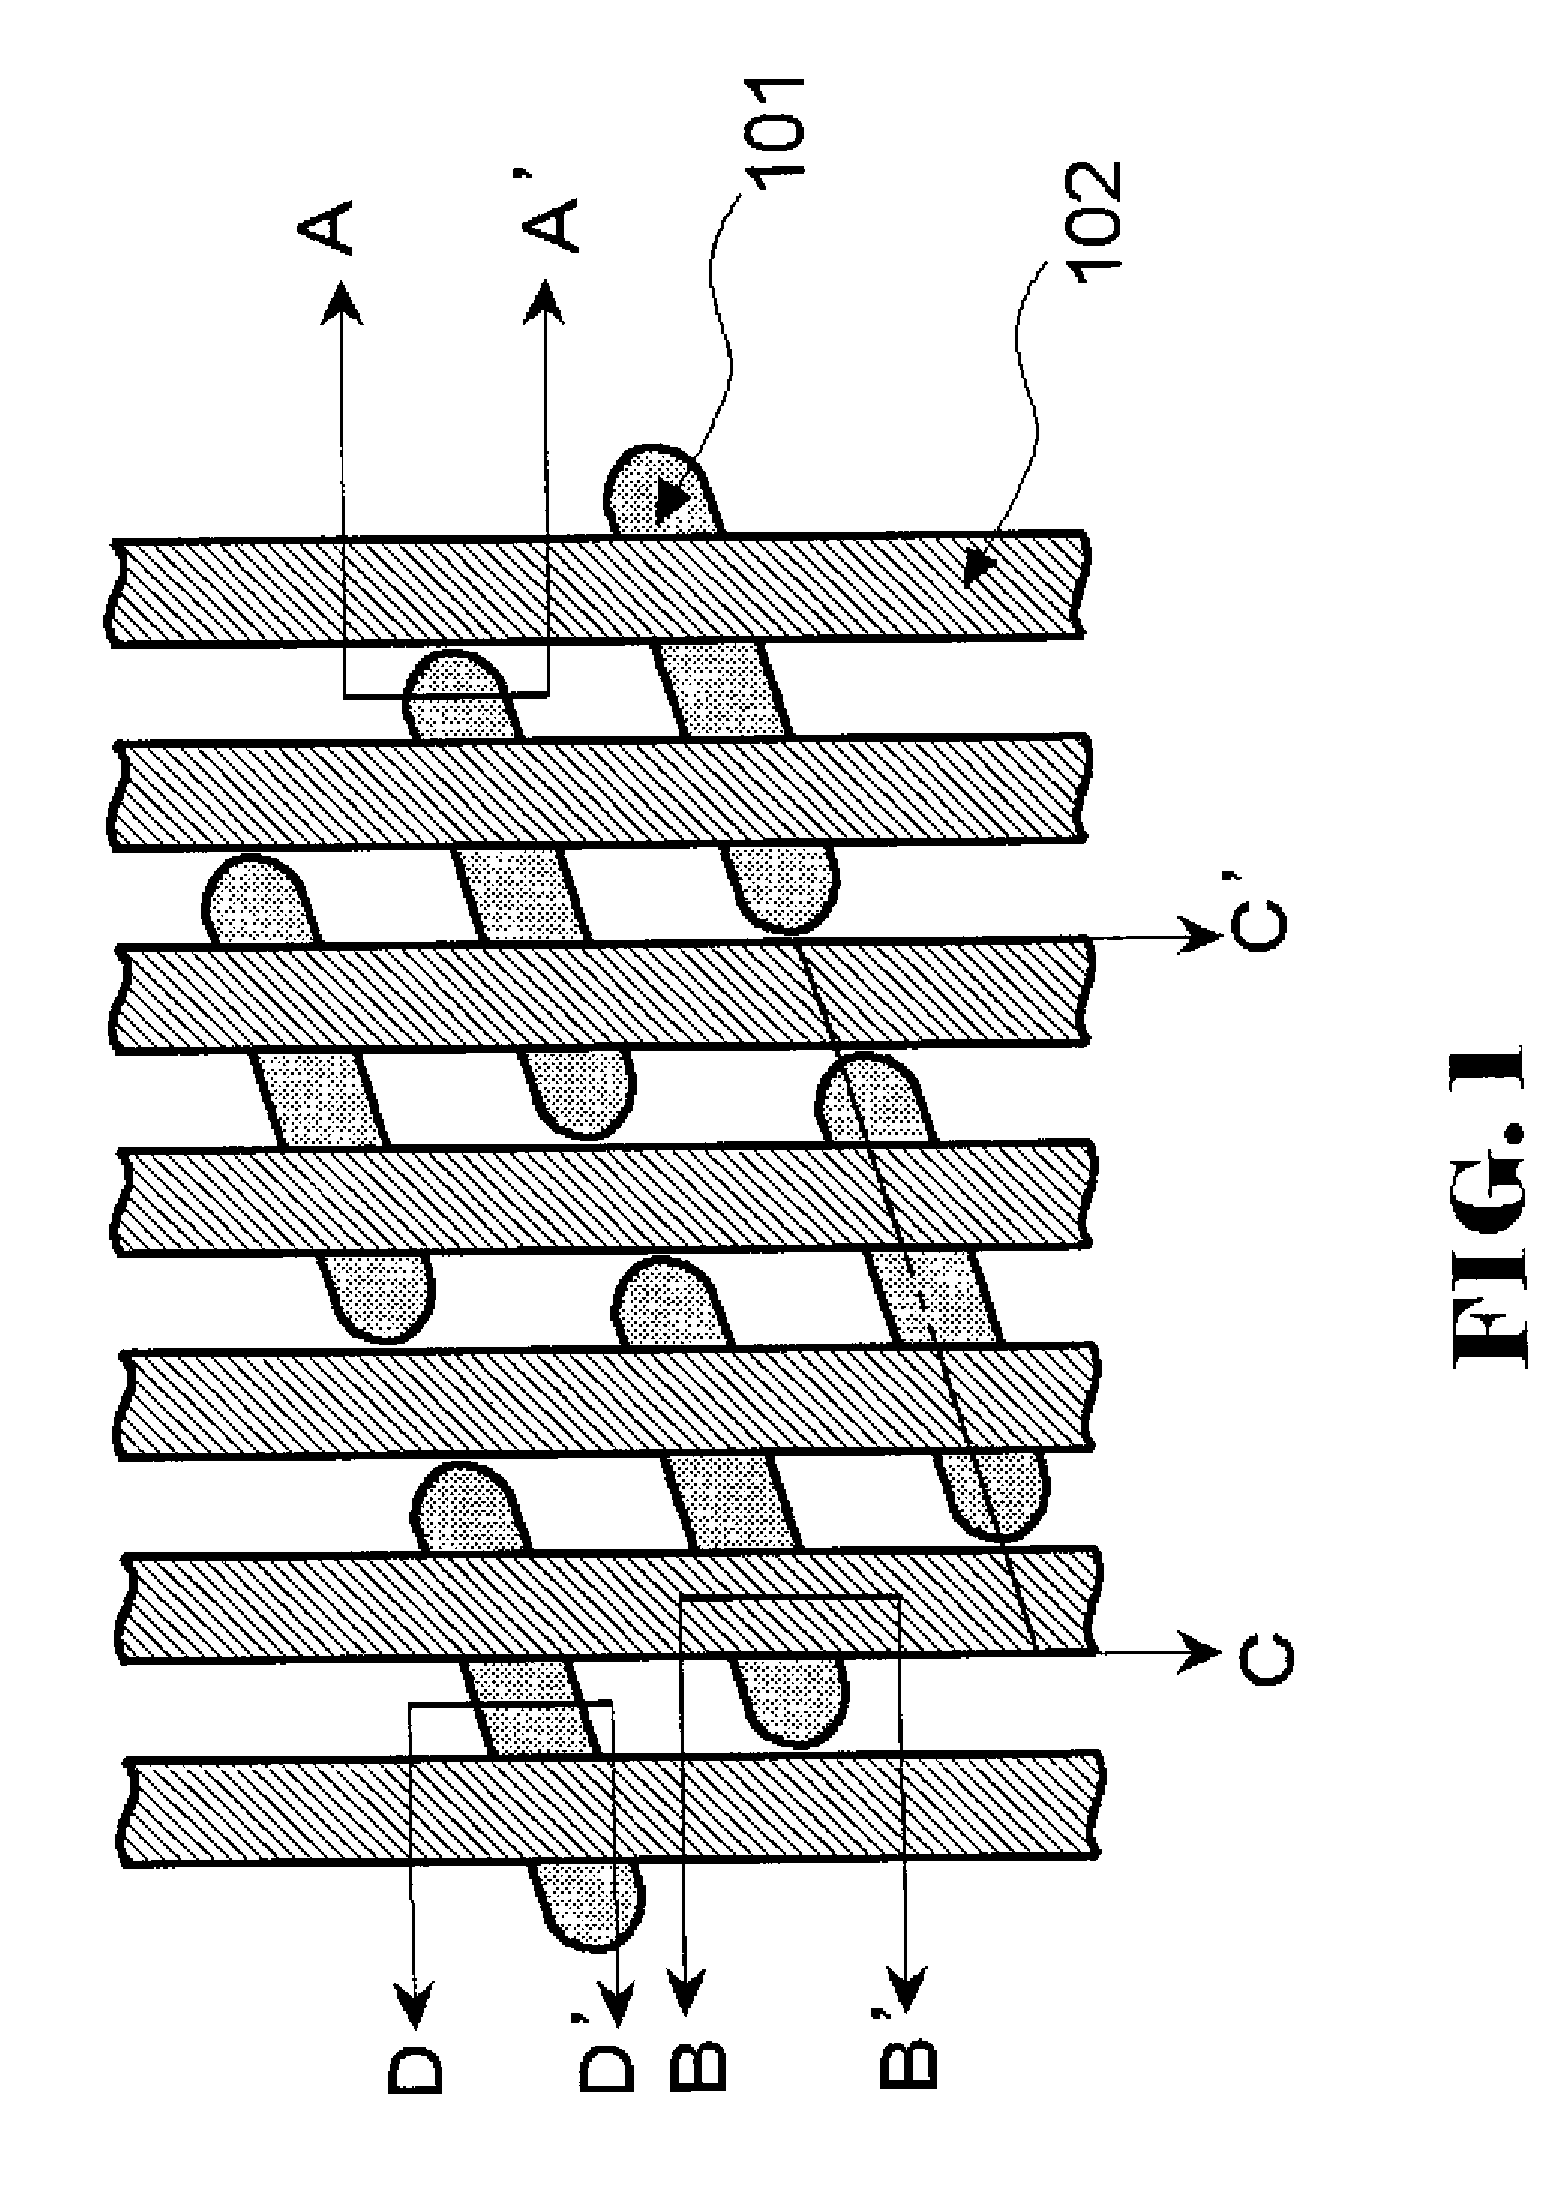 Semiconductor device including a Trench-Gate Fin-FET